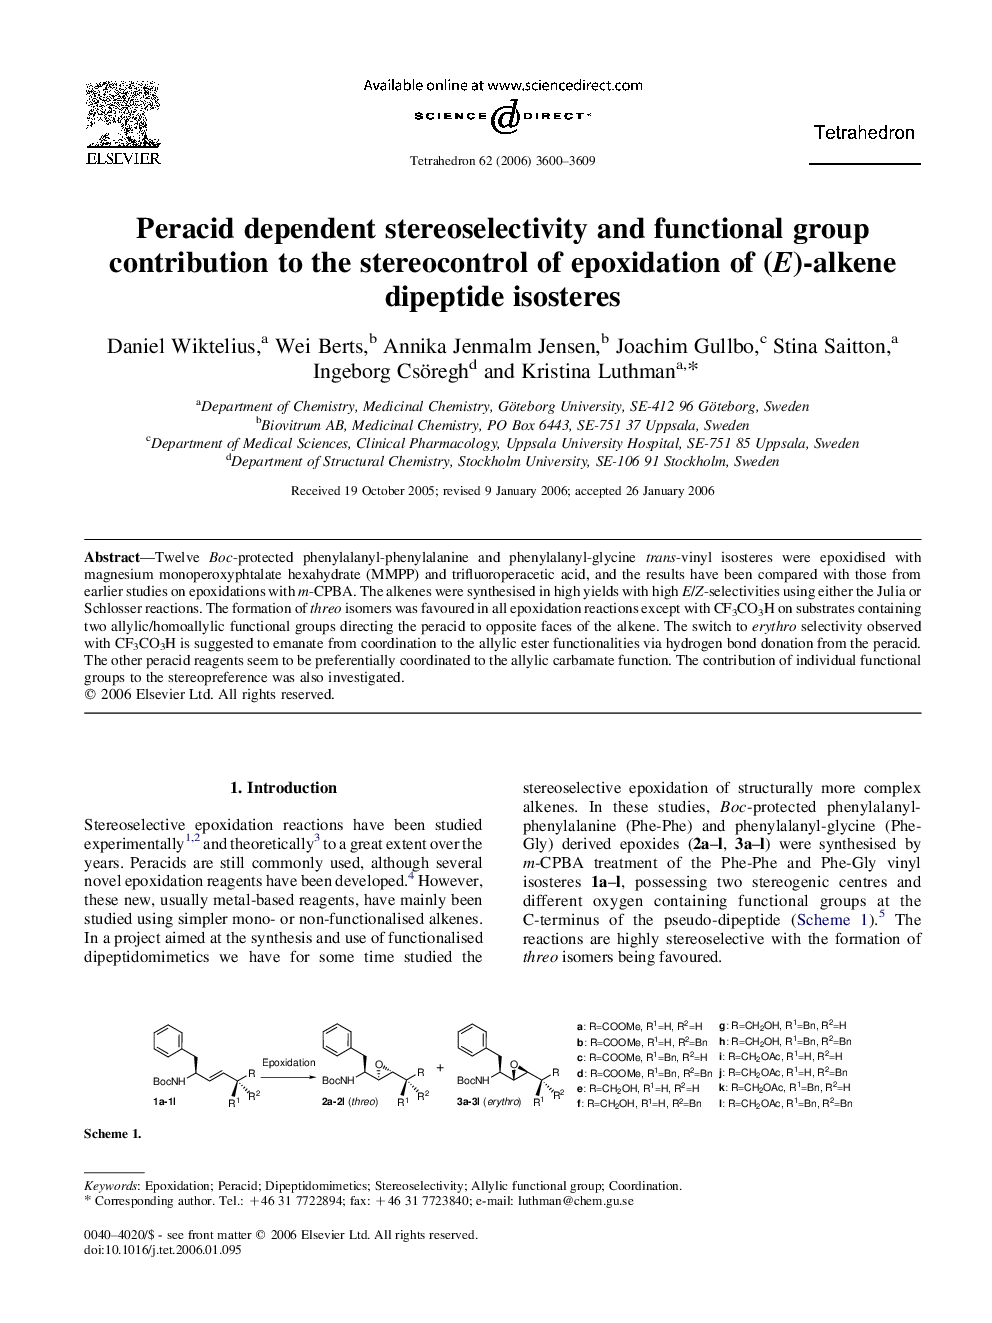 Peracid dependent stereoselectivity and functional group contribution to the stereocontrol of epoxidation of (E)-alkene dipeptide isosteres